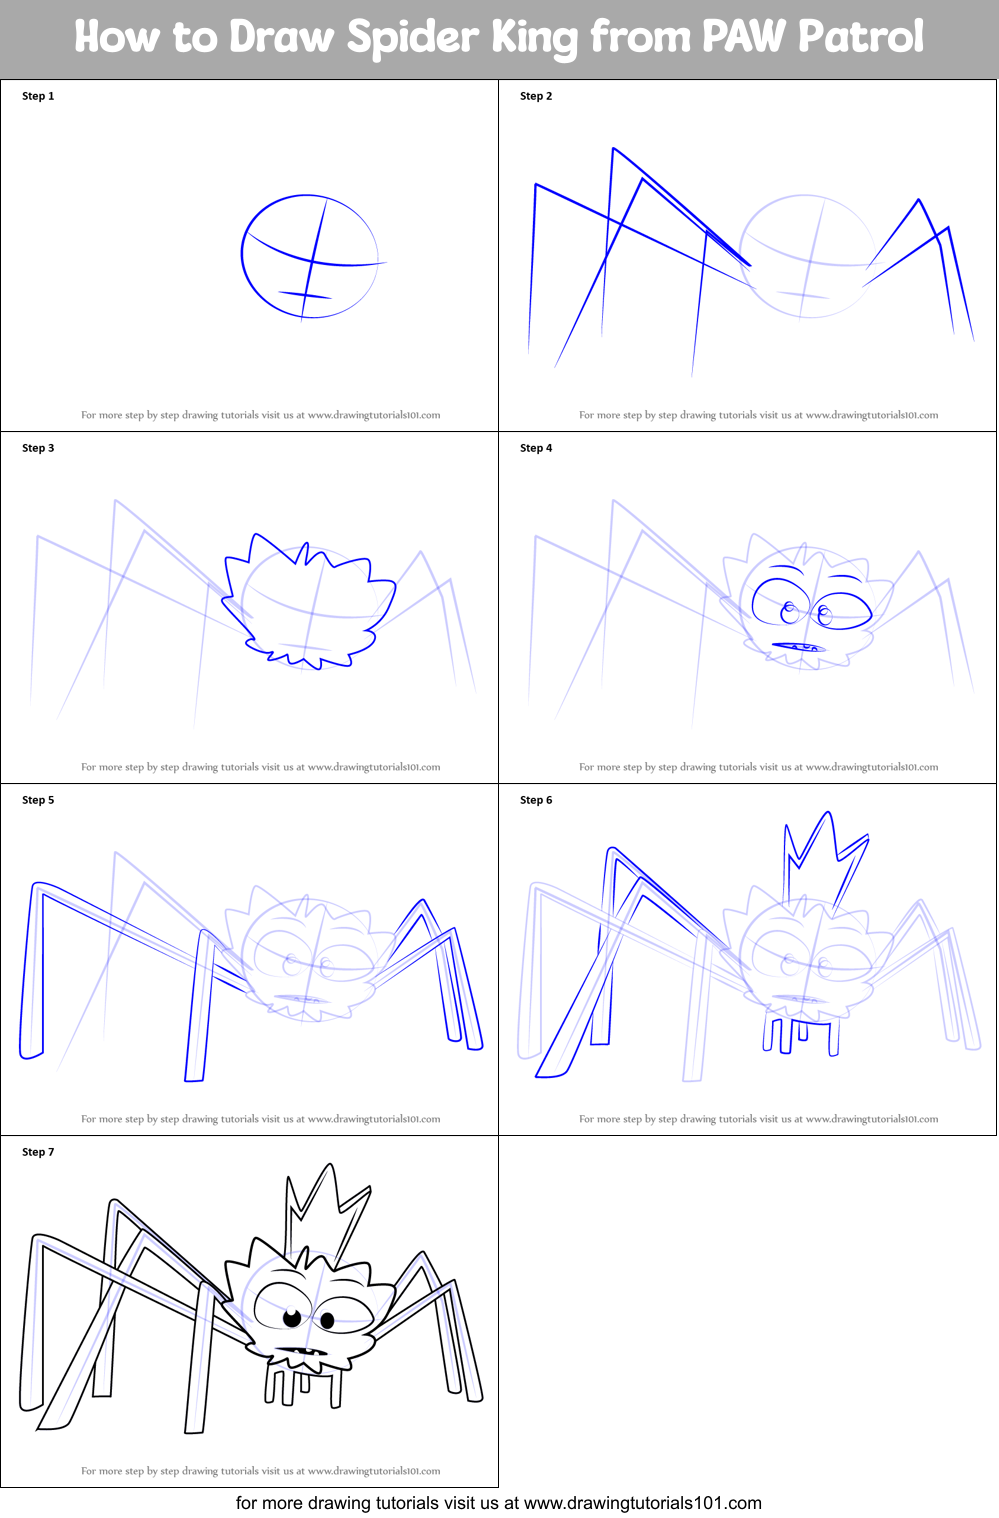 How to Draw Spider from PAW step by step drawing sheet : DrawingTutorials101.com